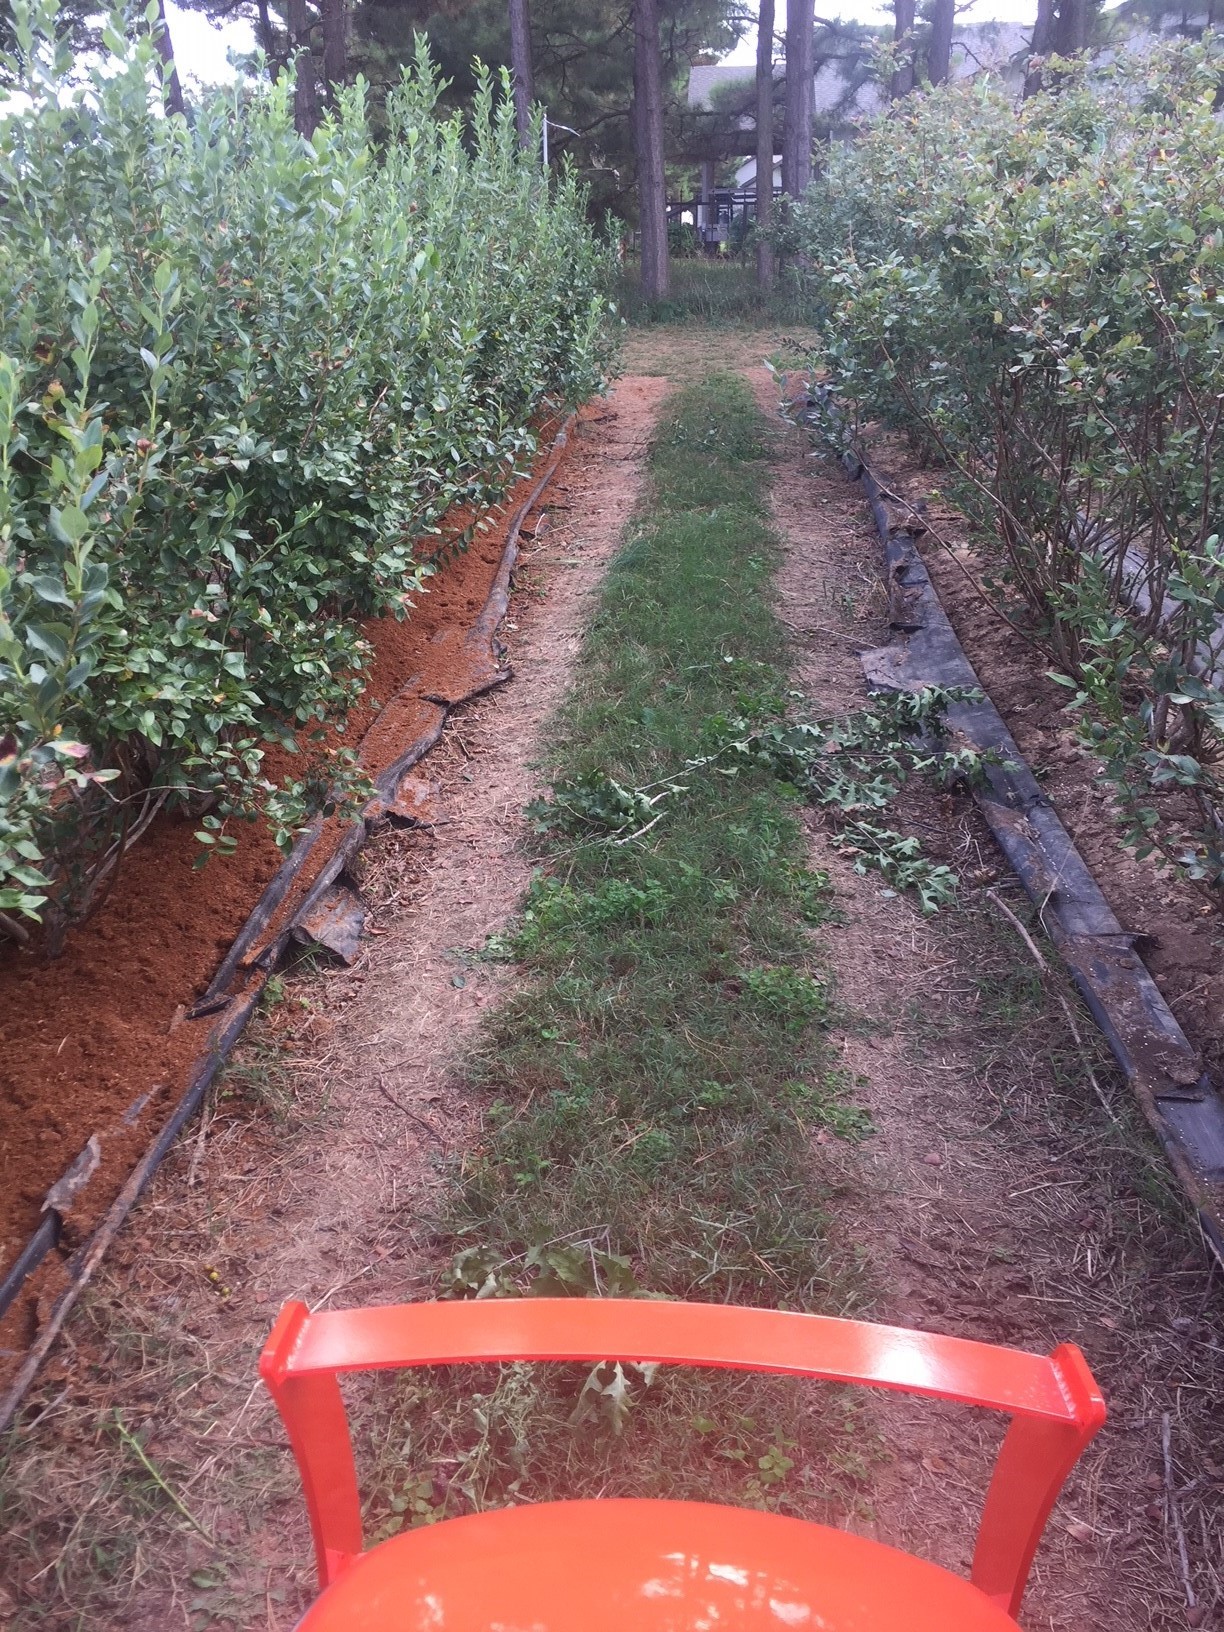 Two rows of blueberries with the surrounding areas around the plantings bare after an herbicide application 